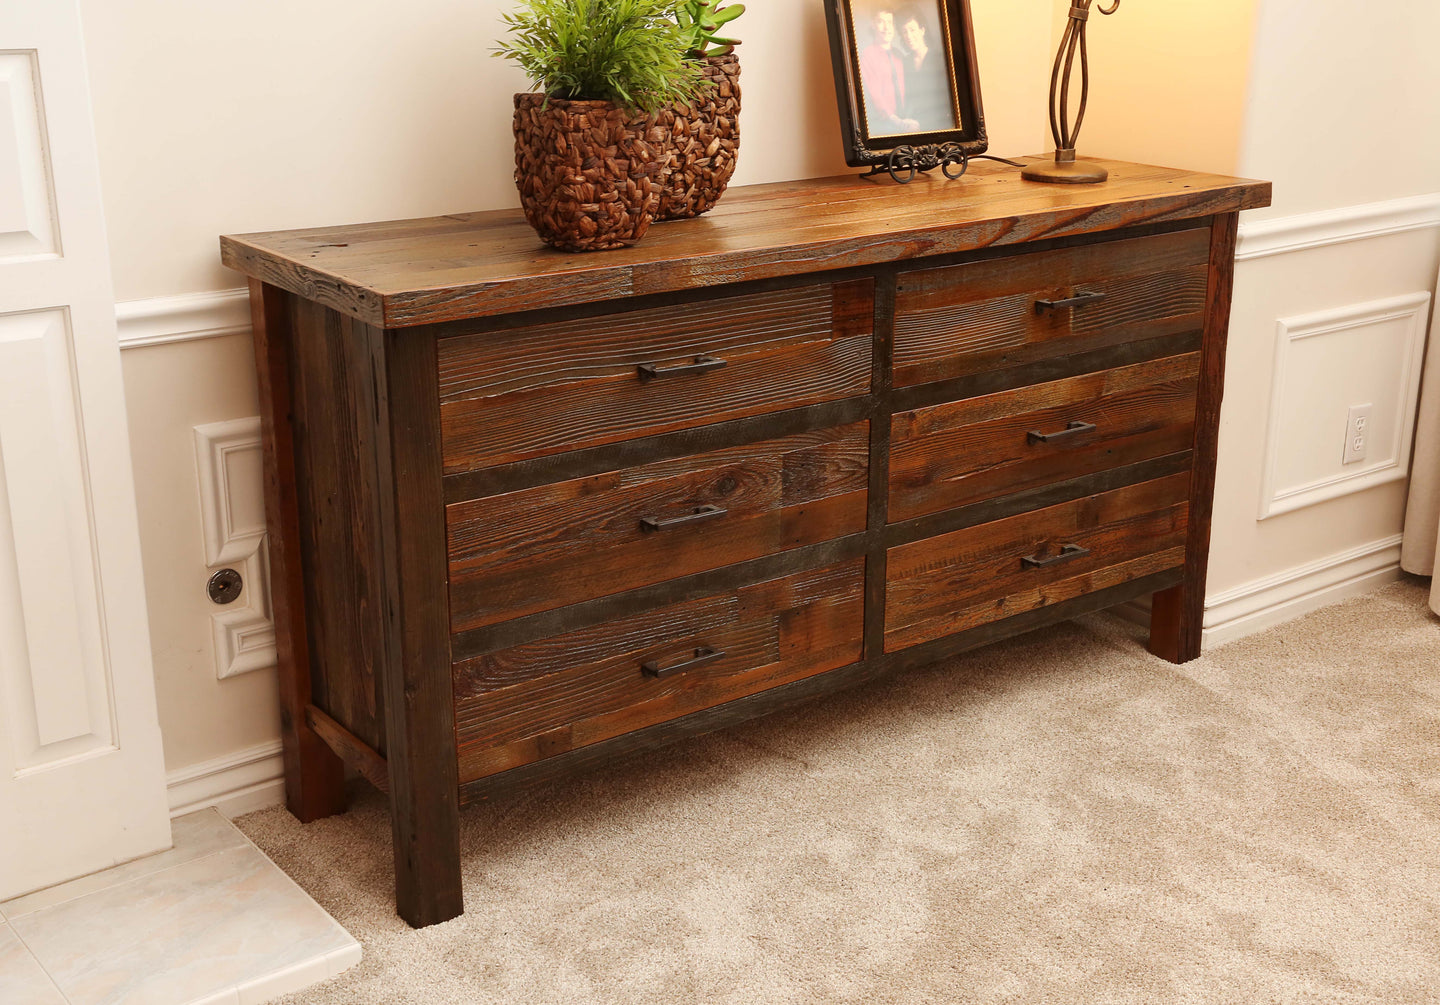 Gorgeous handcrafted solid wood modern rustic six drawer dresser. Made in the U.S.A. from re-claimed barn wood. Very classy and comfortable. Will go great in any bedroom, and will offer plenty of storage with its spacious drawers.